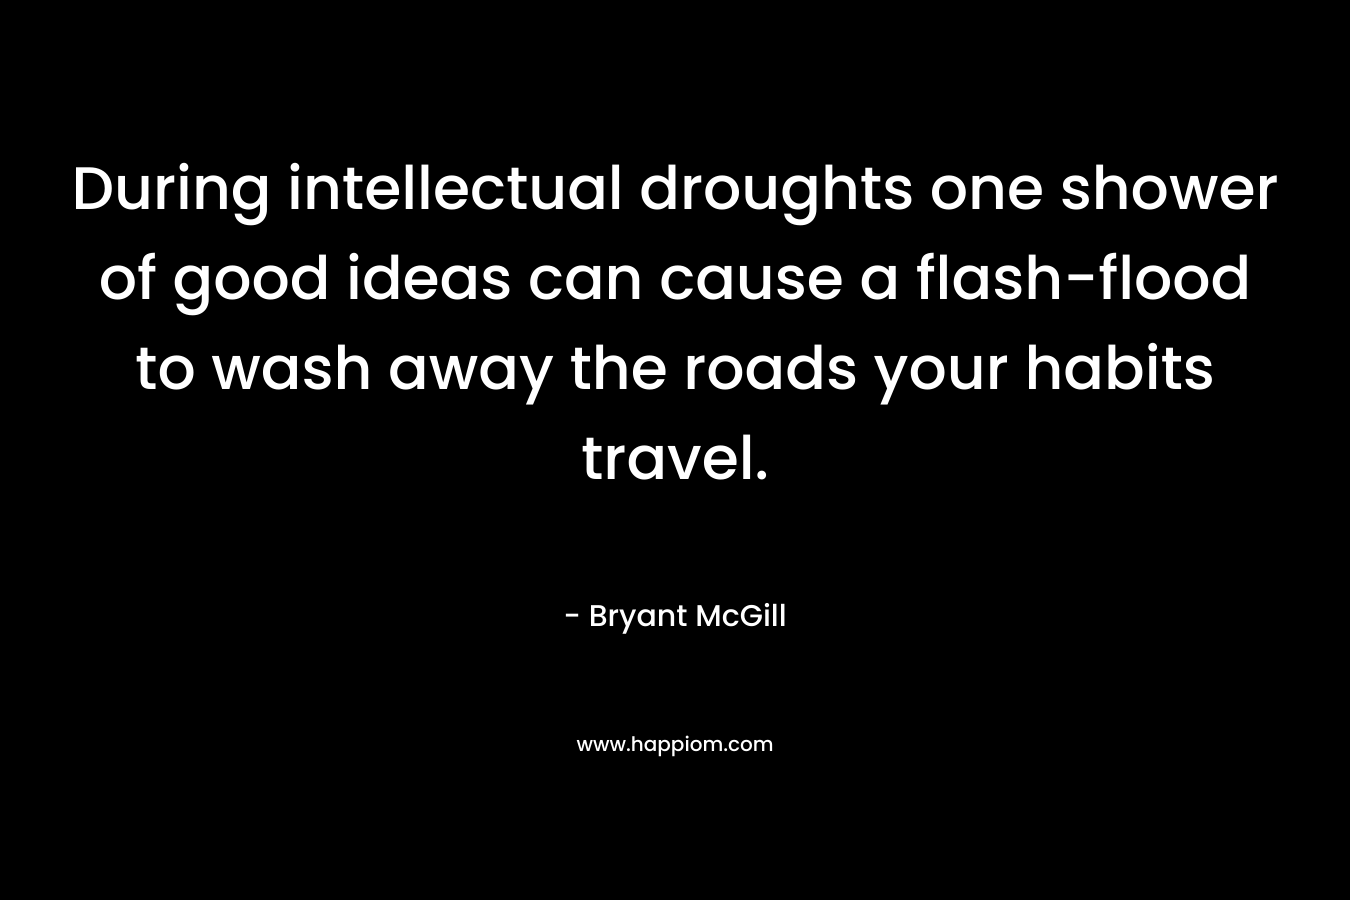 During intellectual droughts one shower of good ideas can cause a flash-flood to wash away the roads your habits travel.